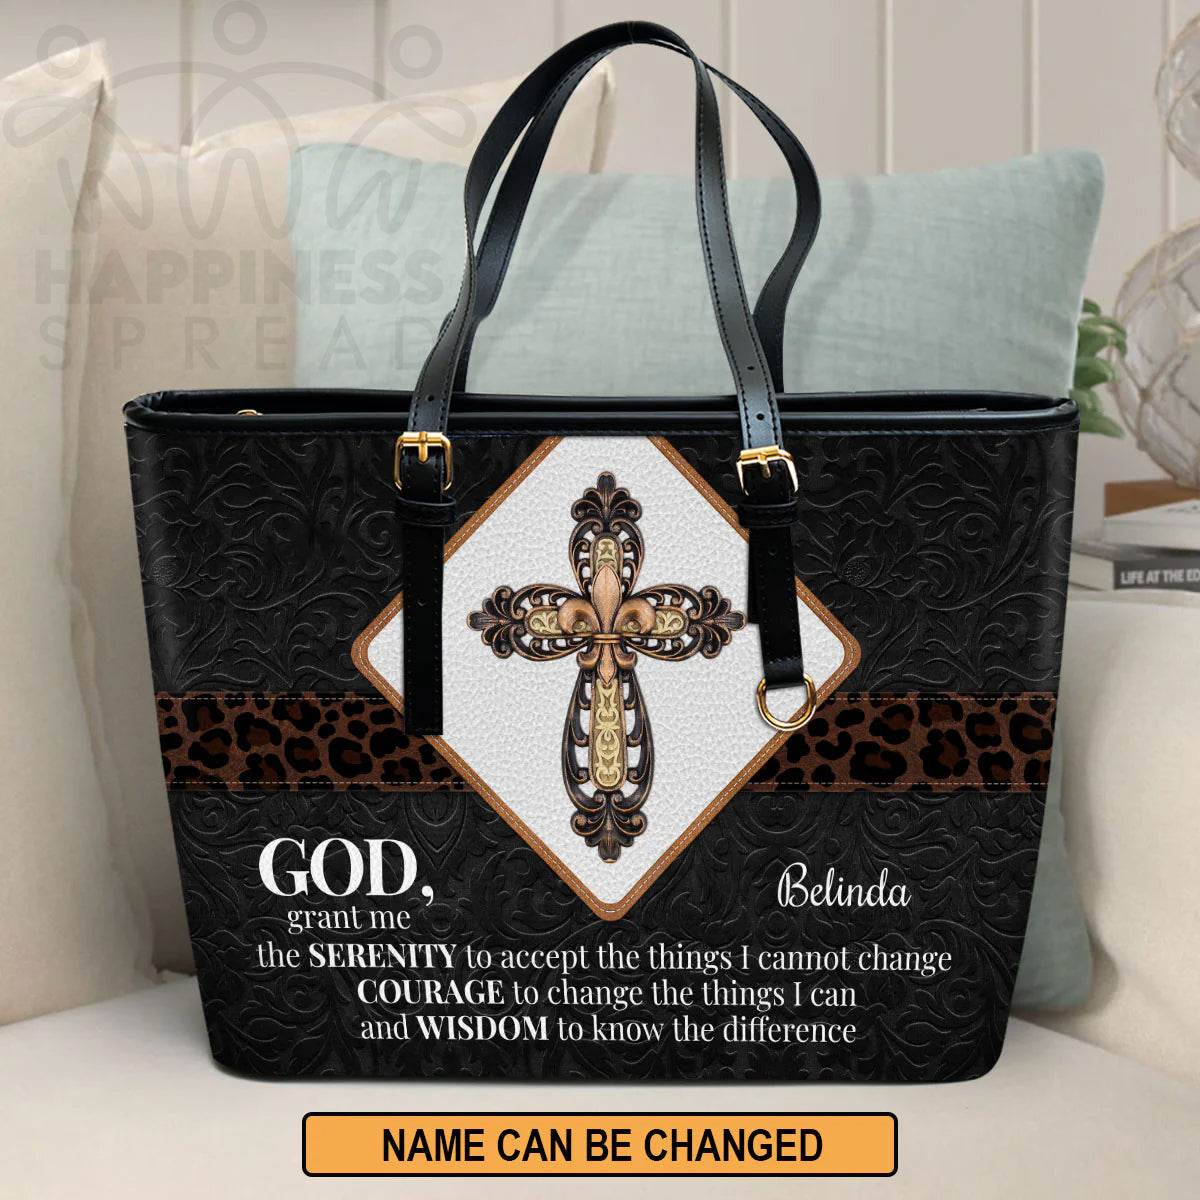 Christianart Handbag, Personalized Hand Bag, God and Cross, Personalized Gifts, Gifts for Women. Leather Tote Bag